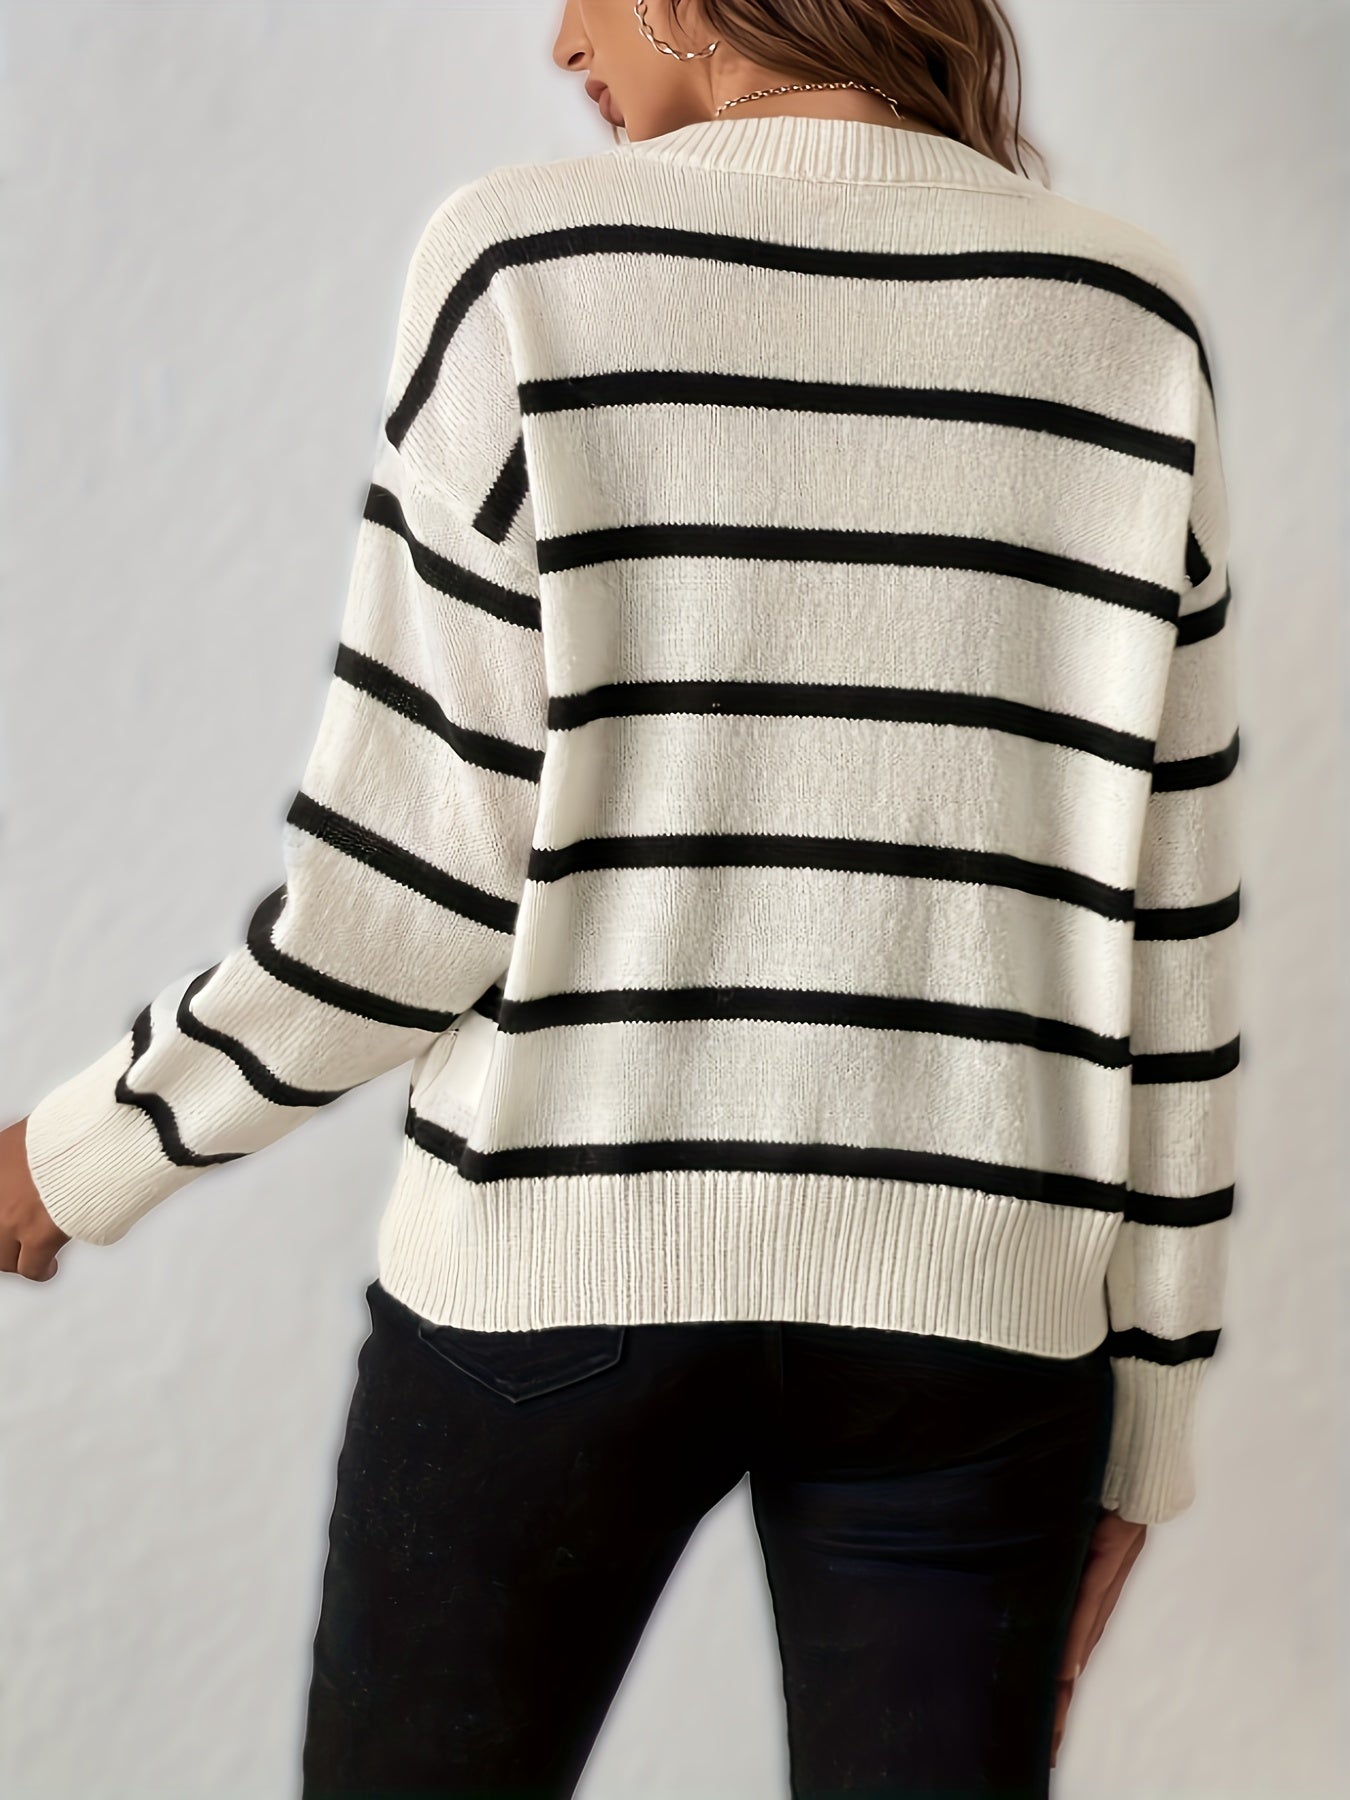 Vzyzv Stripe Pattern Knitted Pullover Top, Casual V Neck Long Sleeve Sweater For Fall & Winter, Women's Clothing